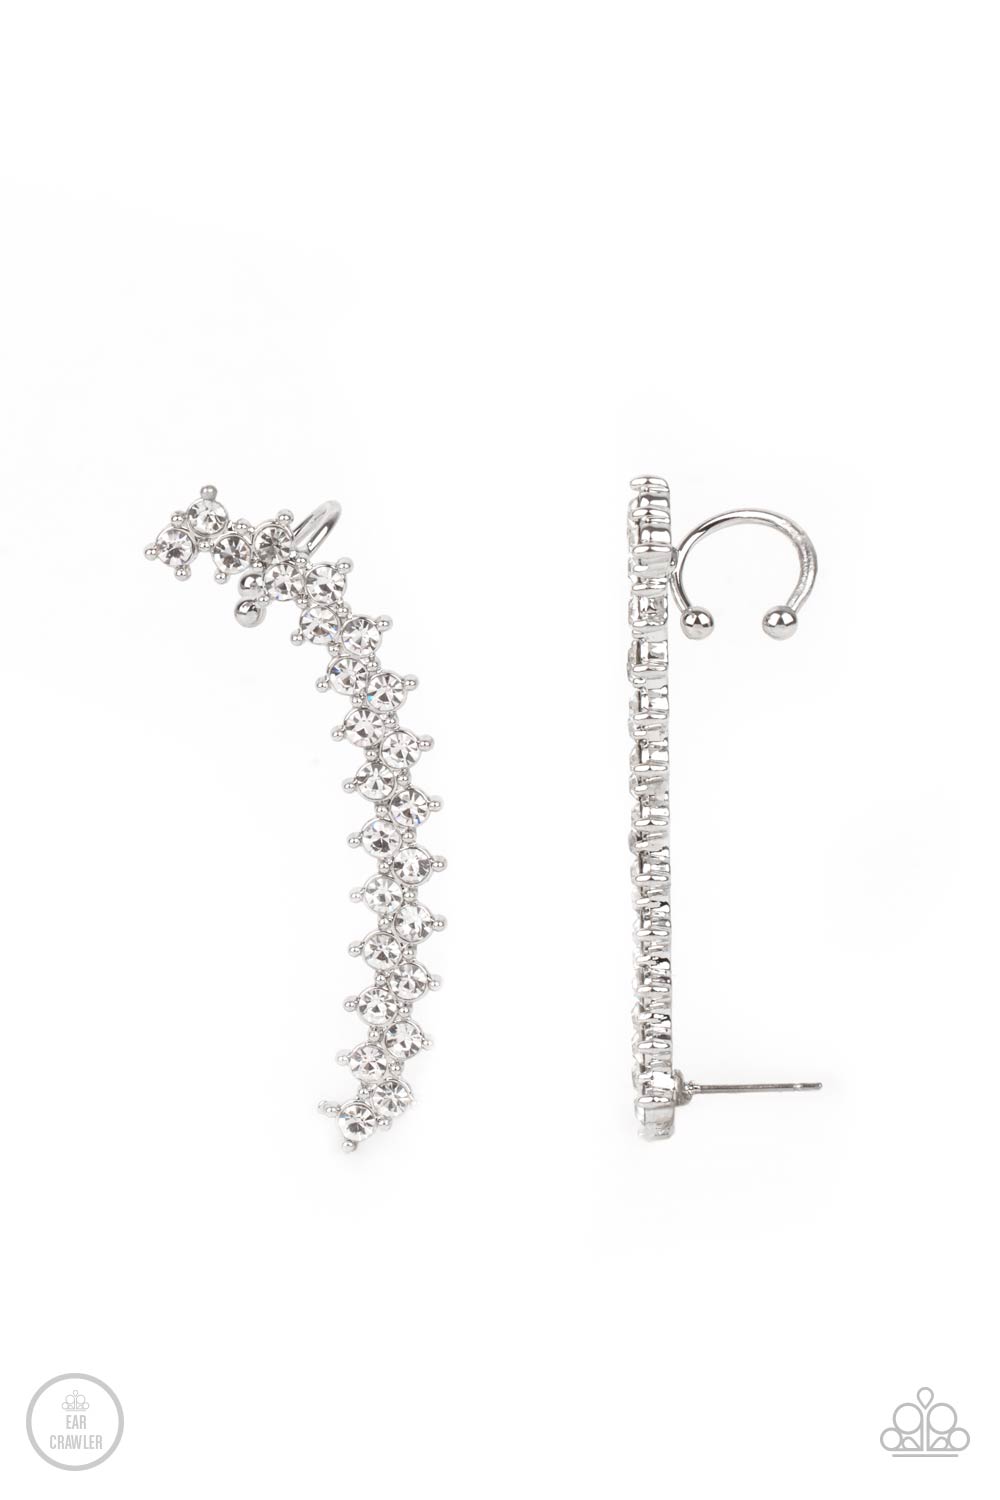 Let There Be LIGHTNING White Ear Crawler Earring - Paparazzi Accessories  Encased in studded silver fittings, pairs of glassy white rhinestones stack into a zigzagging frame up the ear for an electrifying fashion. Features a dainty cuff attached to the top for a secure fit.  Sold as one pair of ear crawlers.